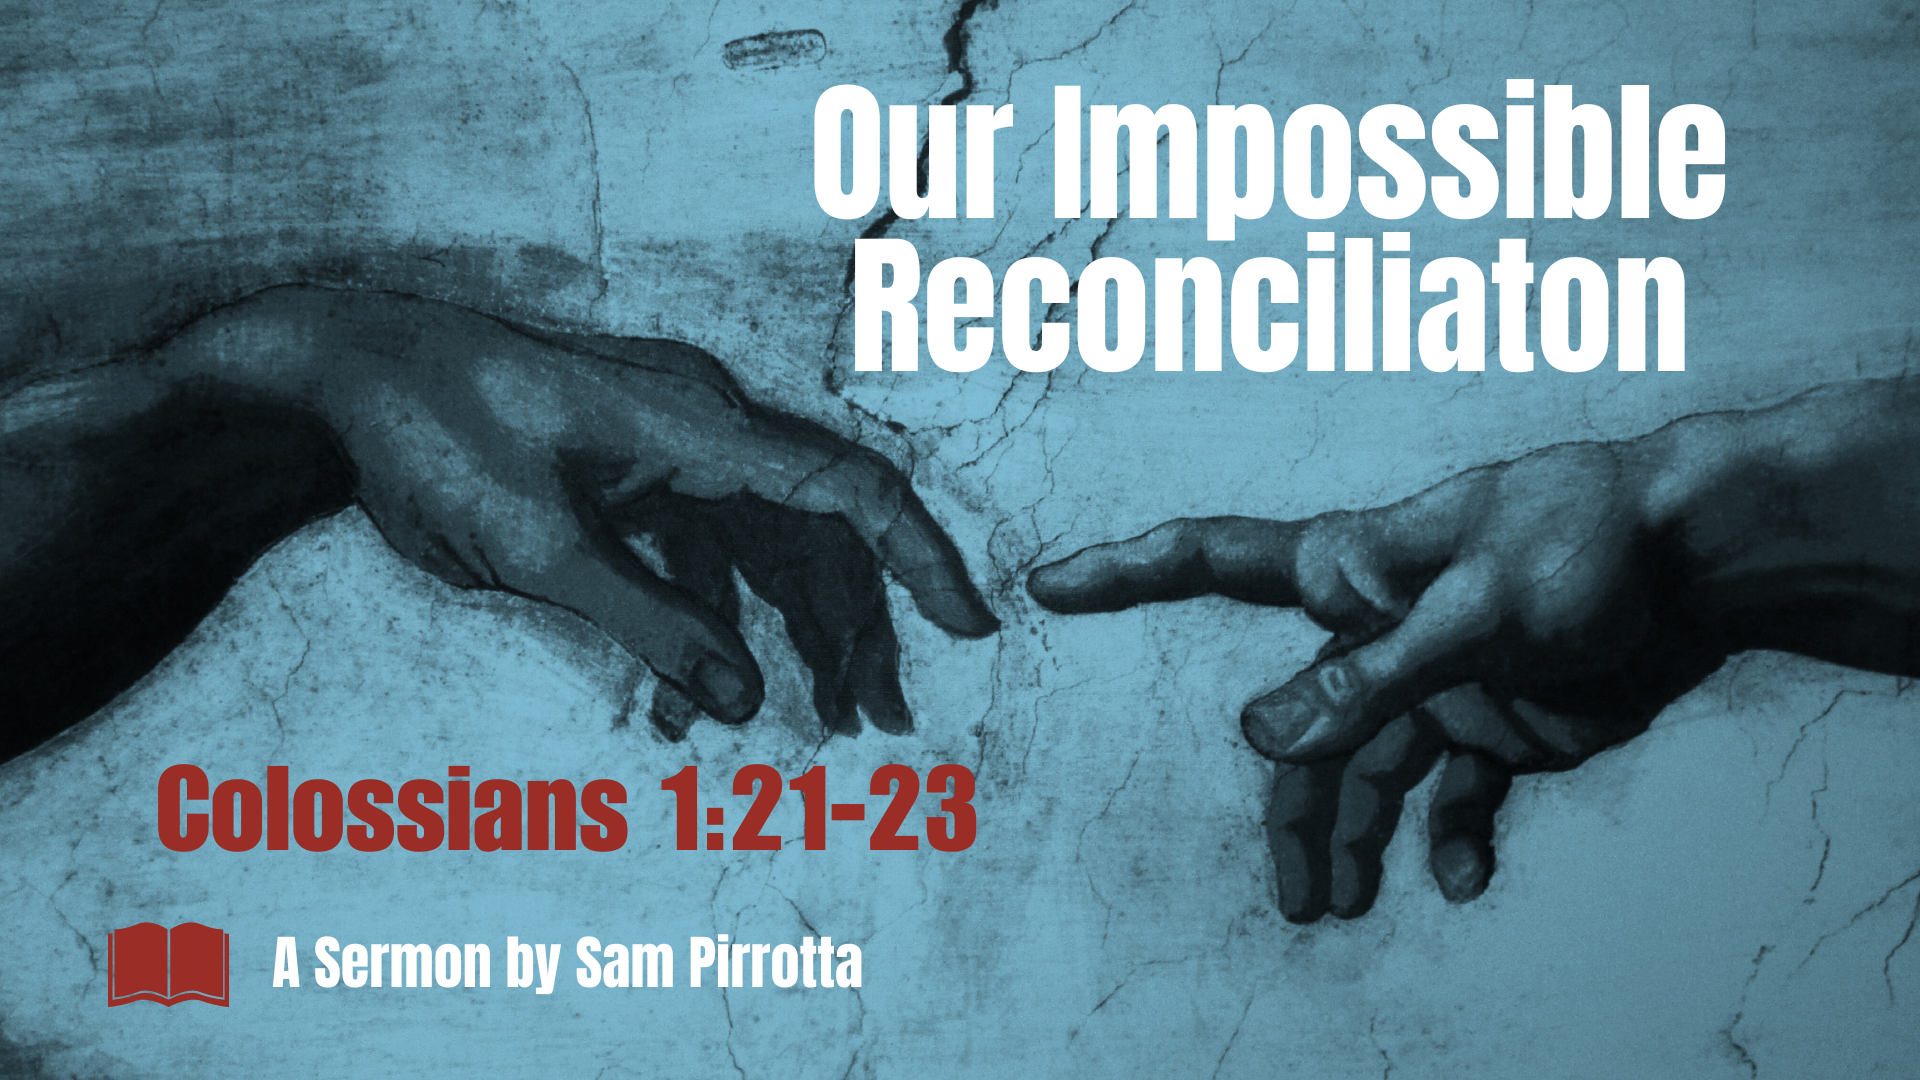 Our Impossible Reconciliation